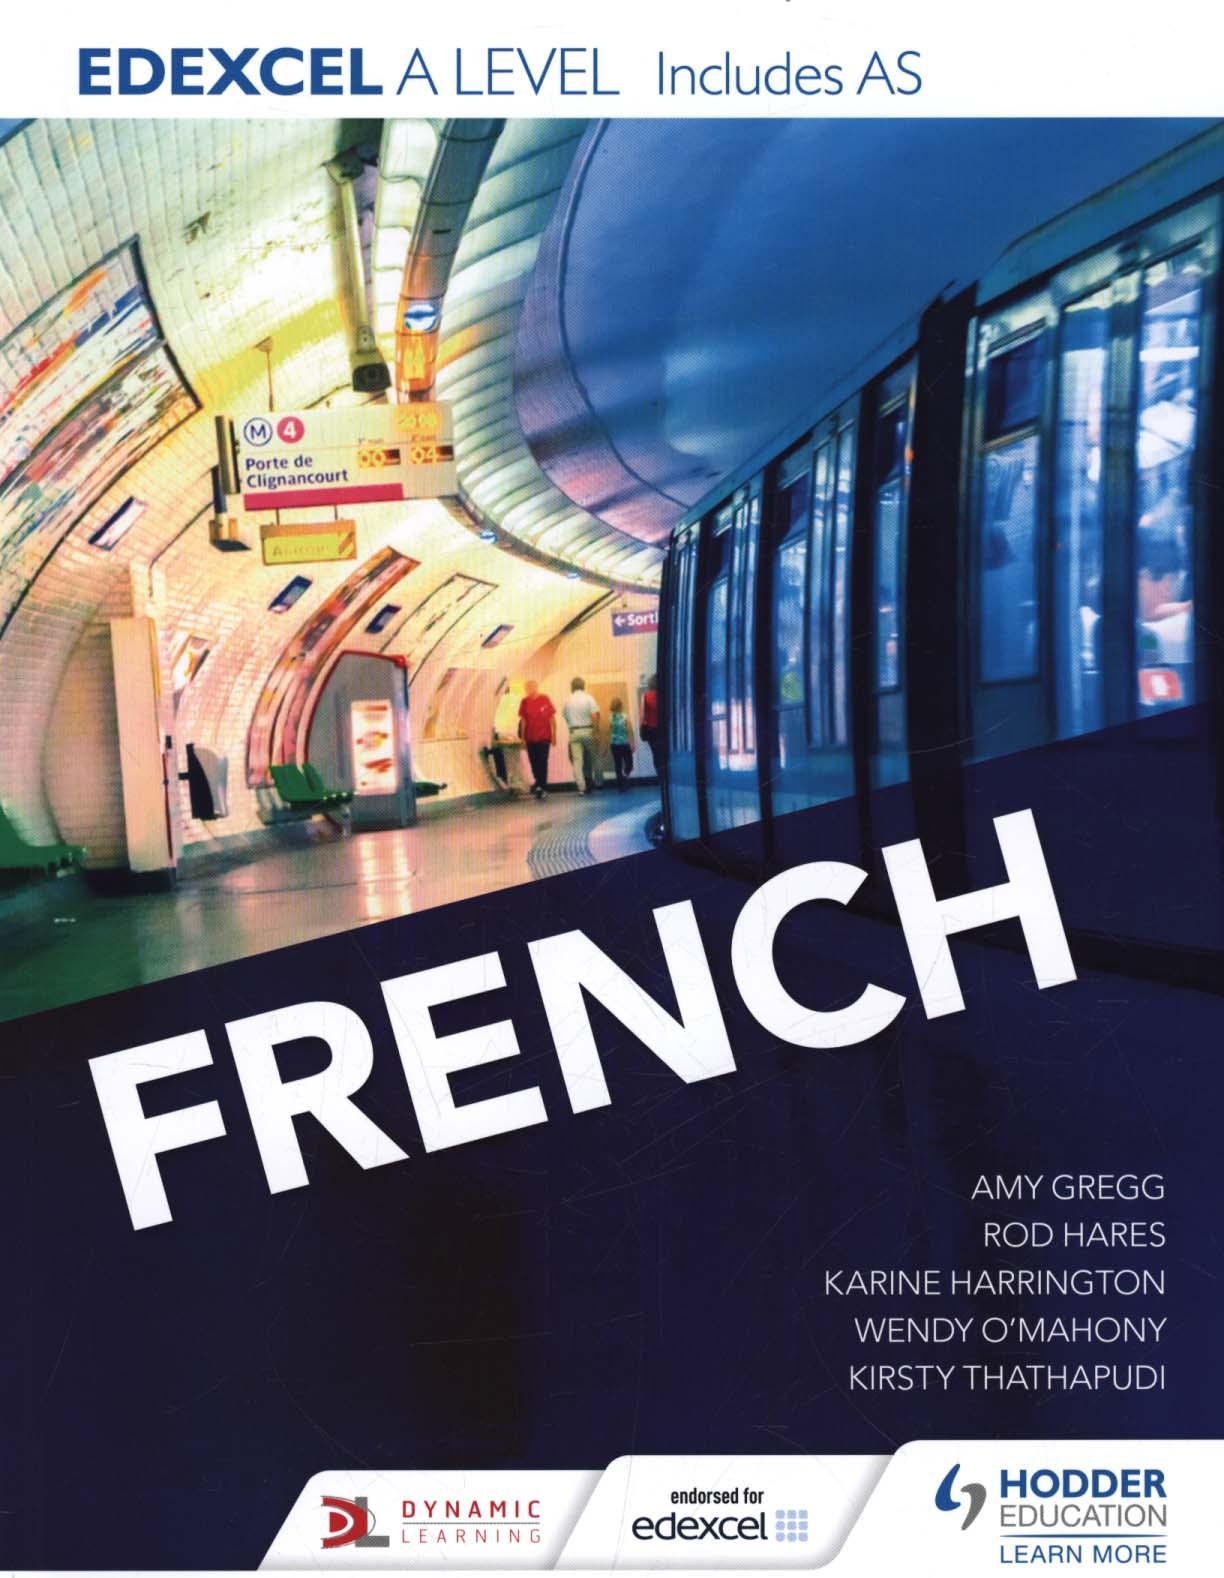 Edexcel A Level French (Includes AS)